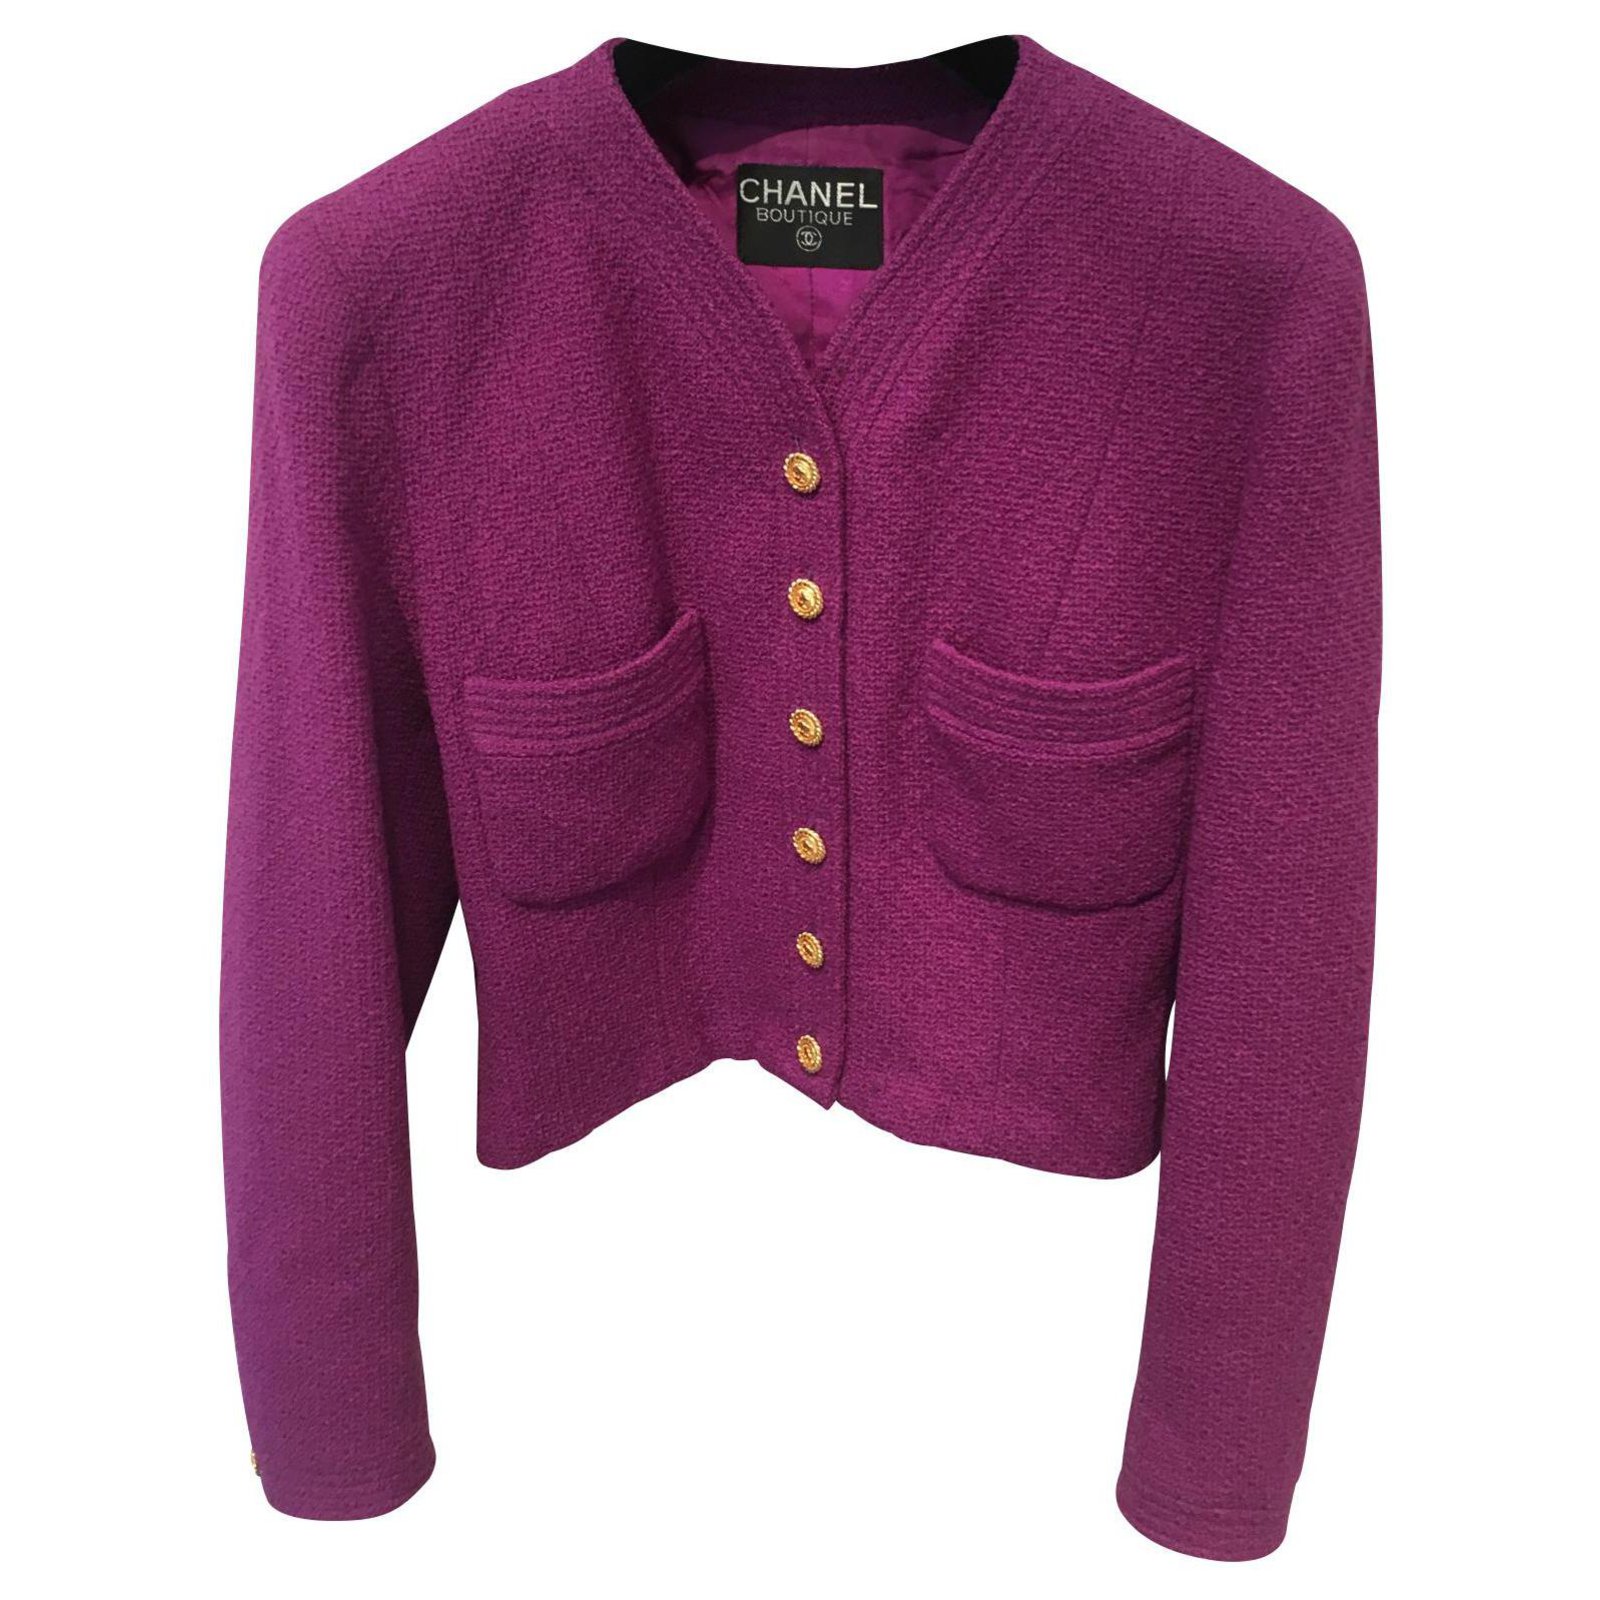 Lilac Chanel Jacket with Gripoix Buttons  Chanel jacket Fashion Jackets